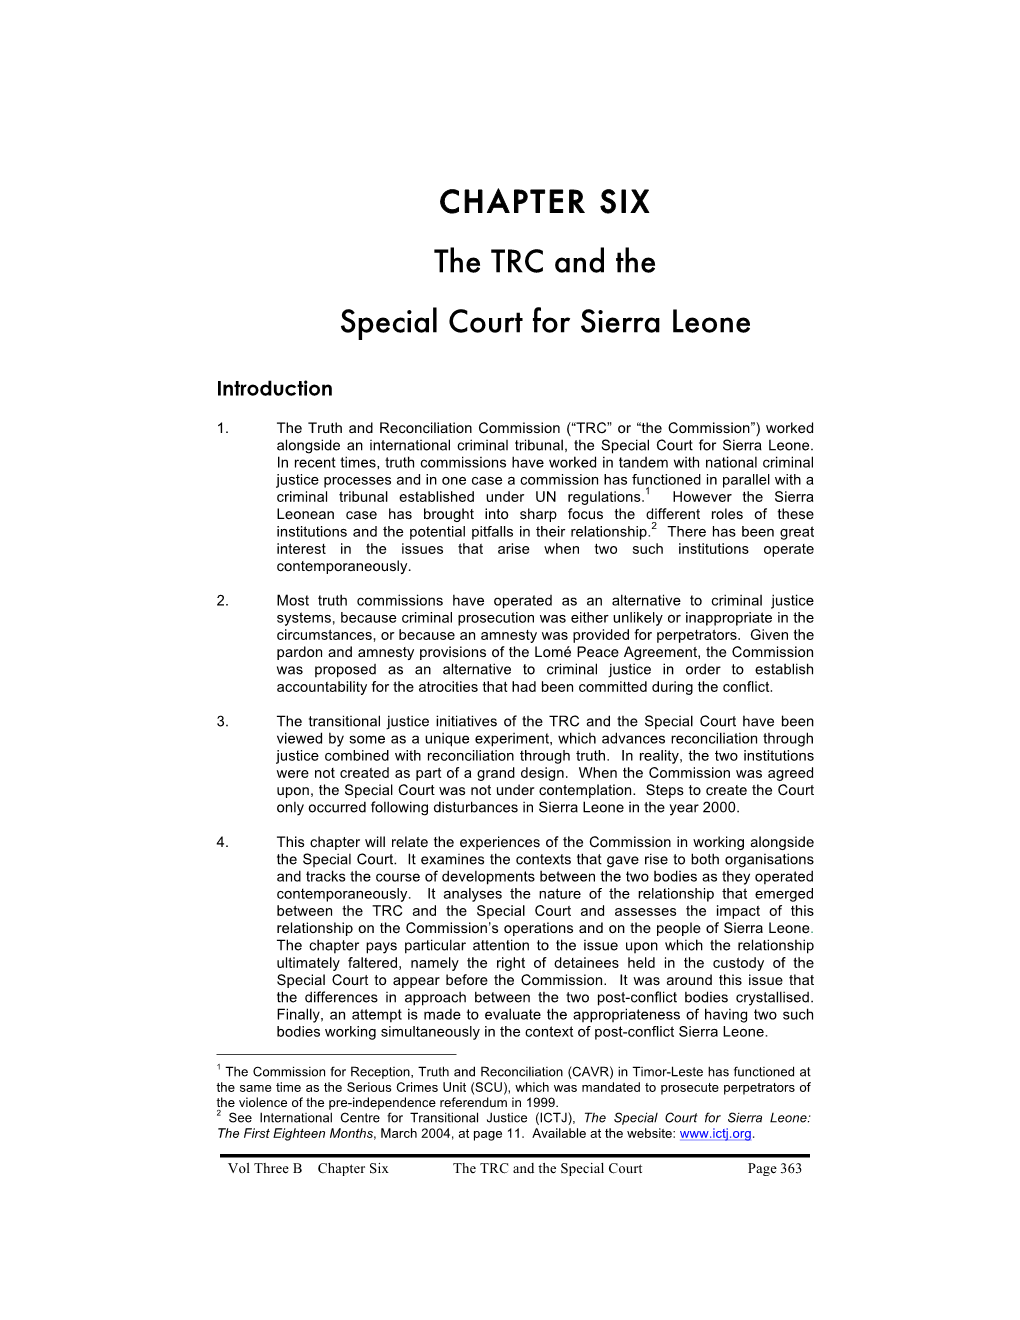 CHAPTER SIX the TRC and the Special Court for Sierra Leone